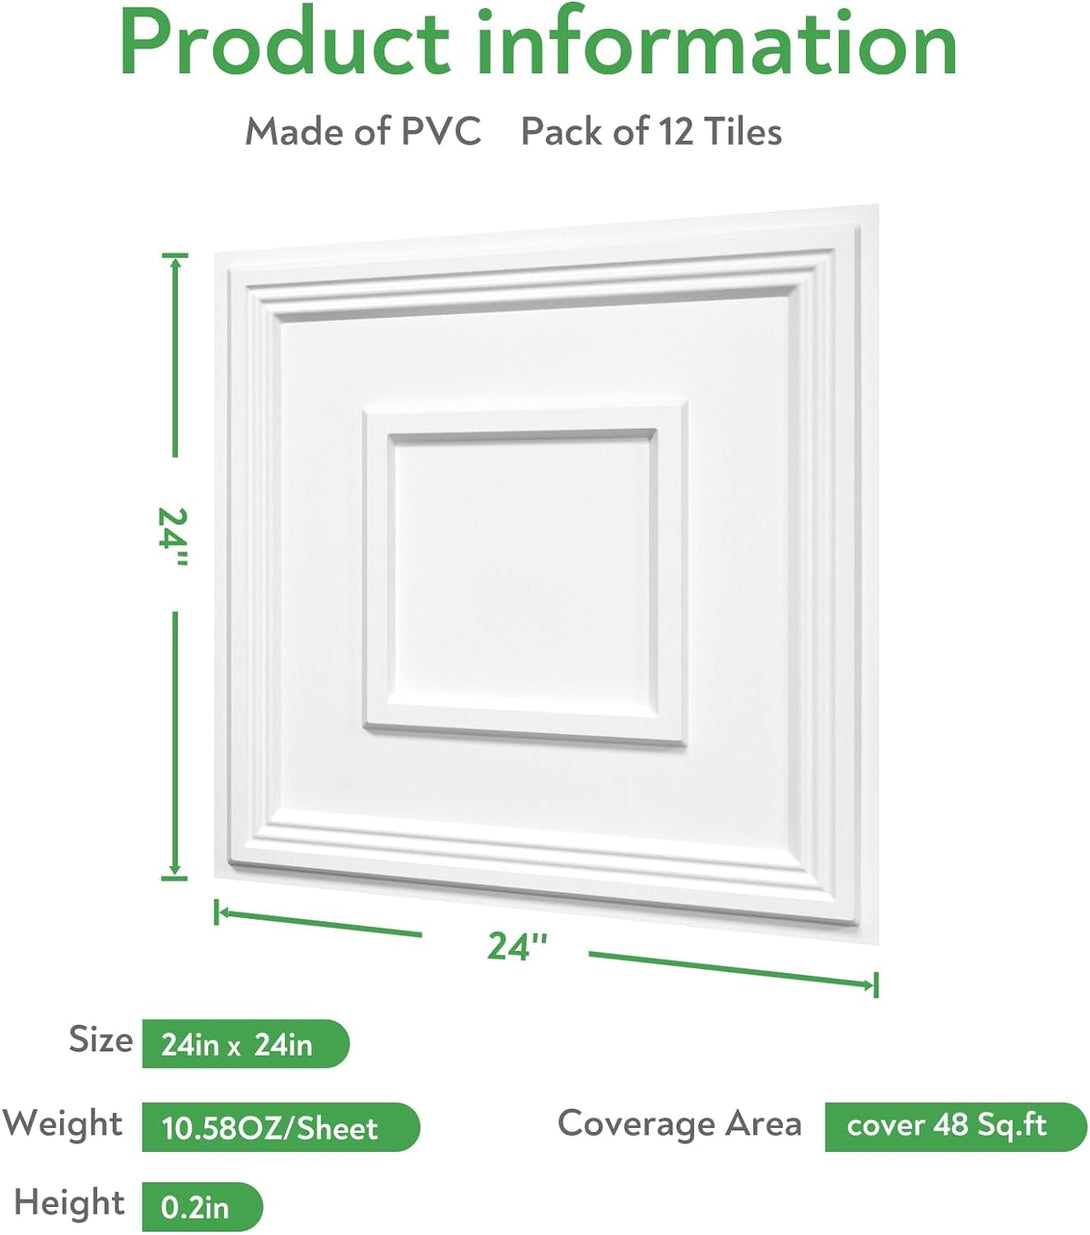 STICKGOO PVC Ceiling Tiles 2'x2' Glue Up Ceiling Panel White 12-Pack